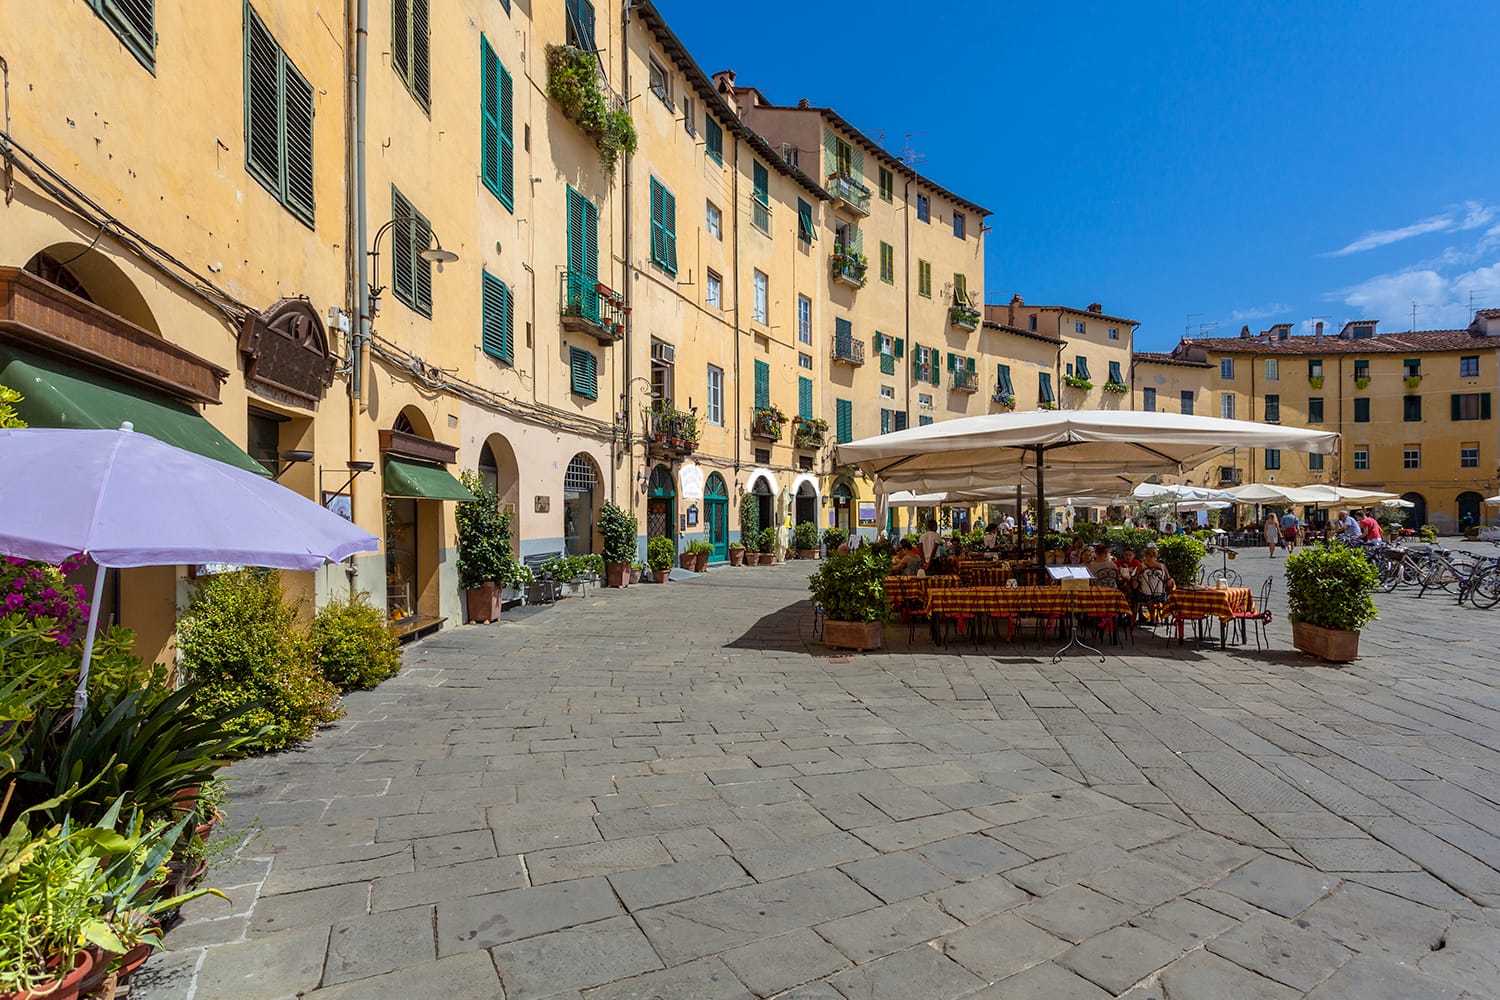 The Famous Oval City Square on a Sunny Day in Lucca, Tuscany, Italy